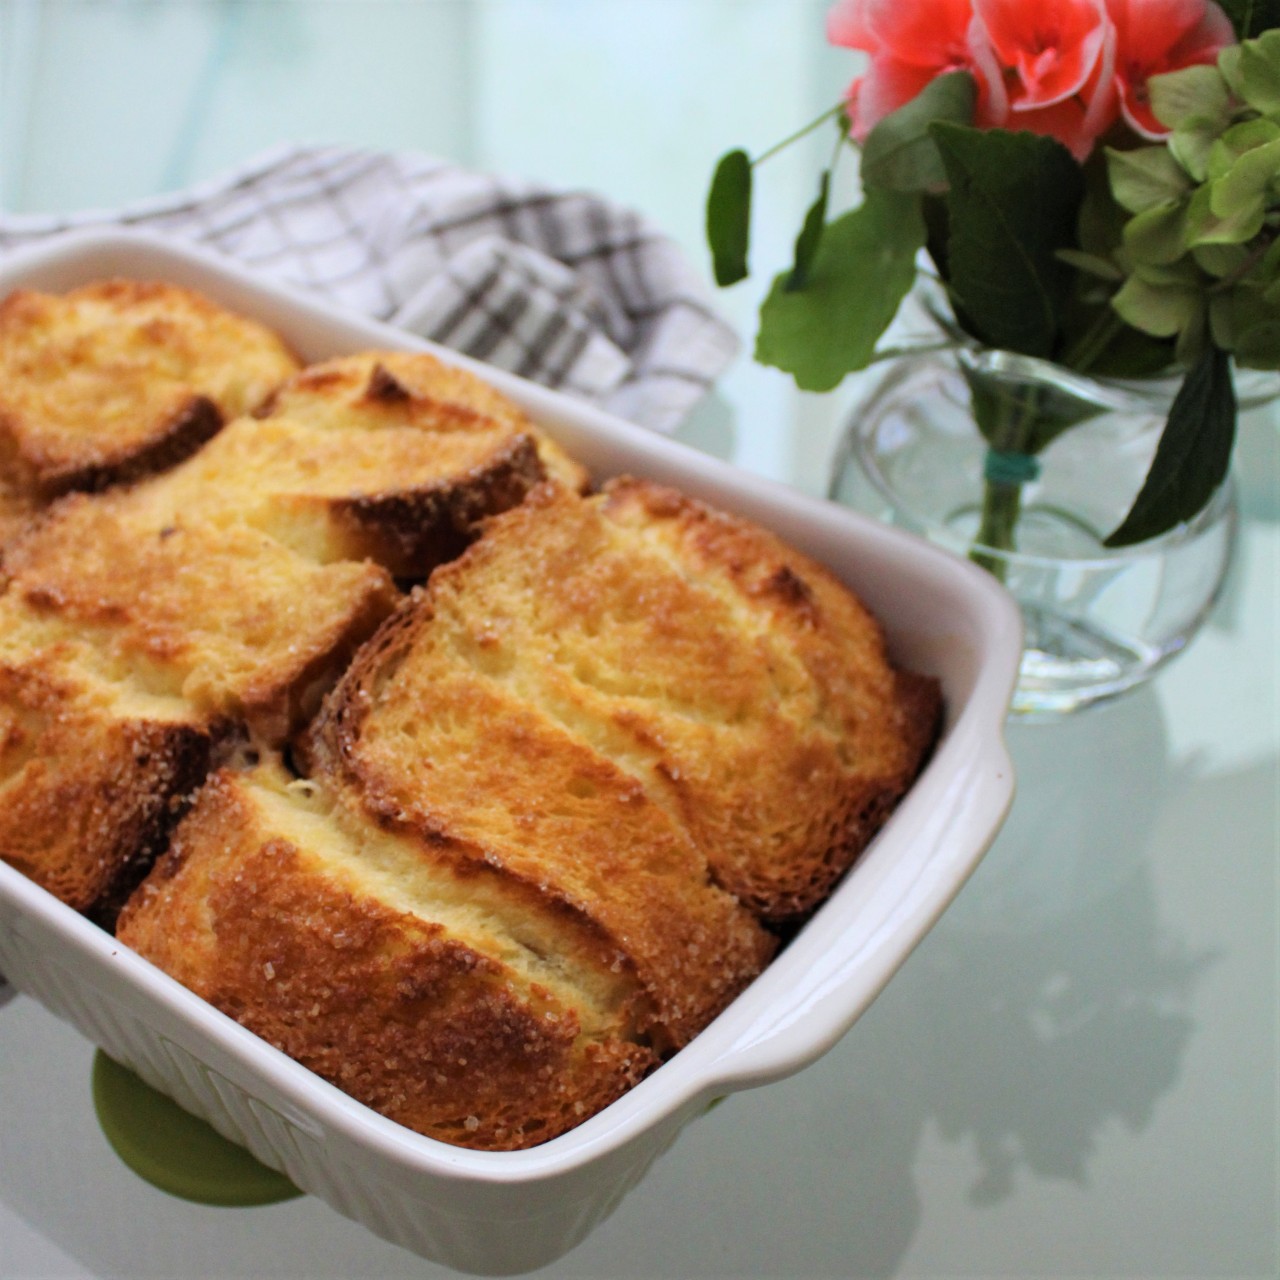 Bread Pudding Recipe
Click on the photo for the recipe for this delicious classic dessert.
By Tastes of Health